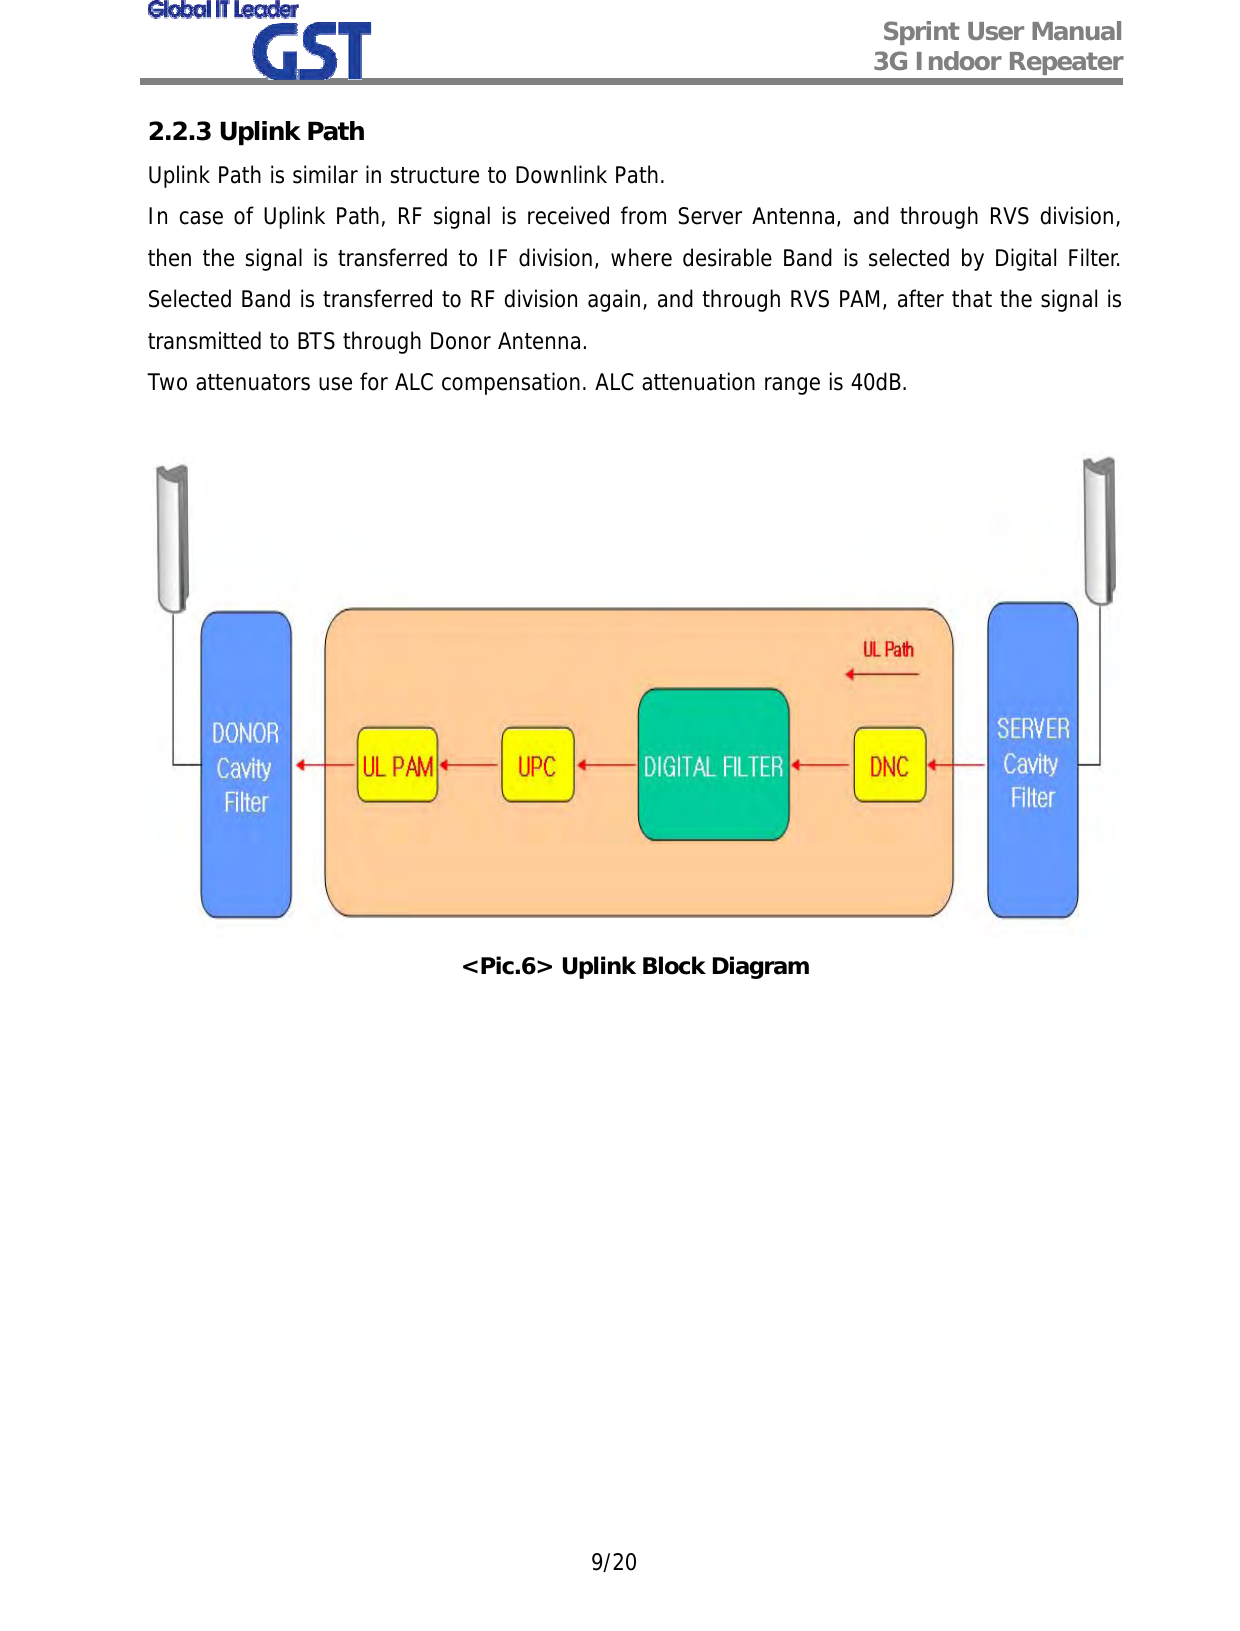  Sprint User Manual 3G Indoor Repeater   9/20 2.2.3 Uplink Path Uplink Path is similar in structure to Downlink Path. In case of Uplink Path, RF signal is received from Server Antenna, and through RVS division, then the signal is transferred to IF division, where desirable Band is selected by Digital Filter. Selected Band is transferred to RF division again, and through RVS PAM, after that the signal is transmitted to BTS through Donor Antenna. Two attenuators use for ALC compensation. ALC attenuation range is 40dB.   &lt;Pic.6&gt; Uplink Block Diagram              